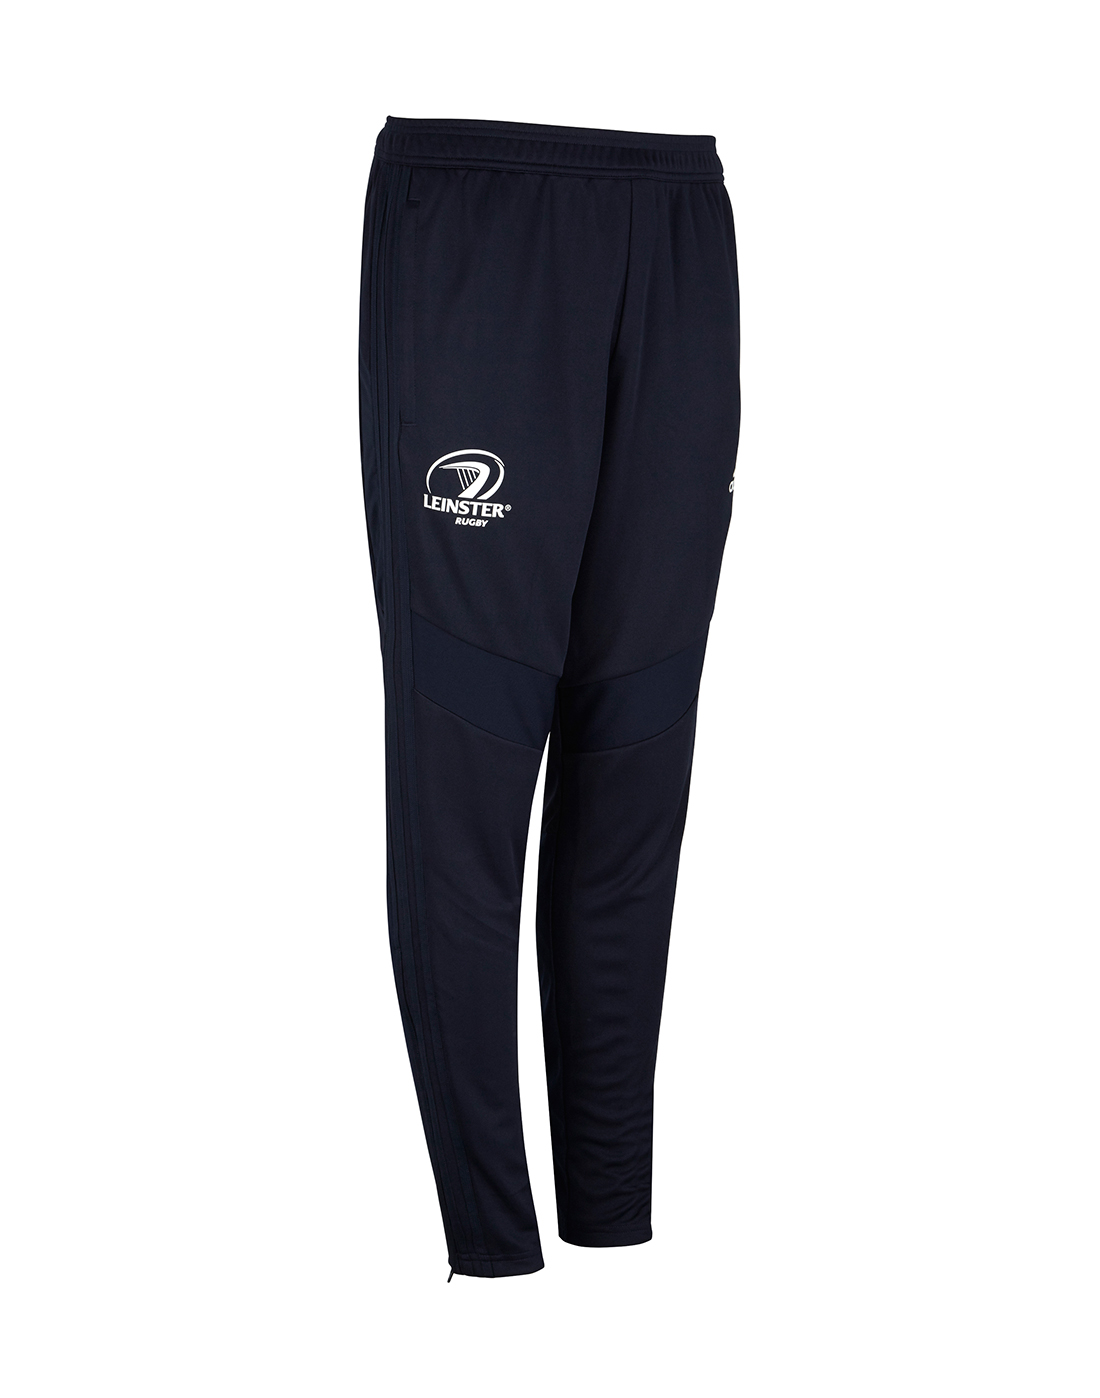 Navy Leinster Rugby Pants 19/20 | Life Style Sports